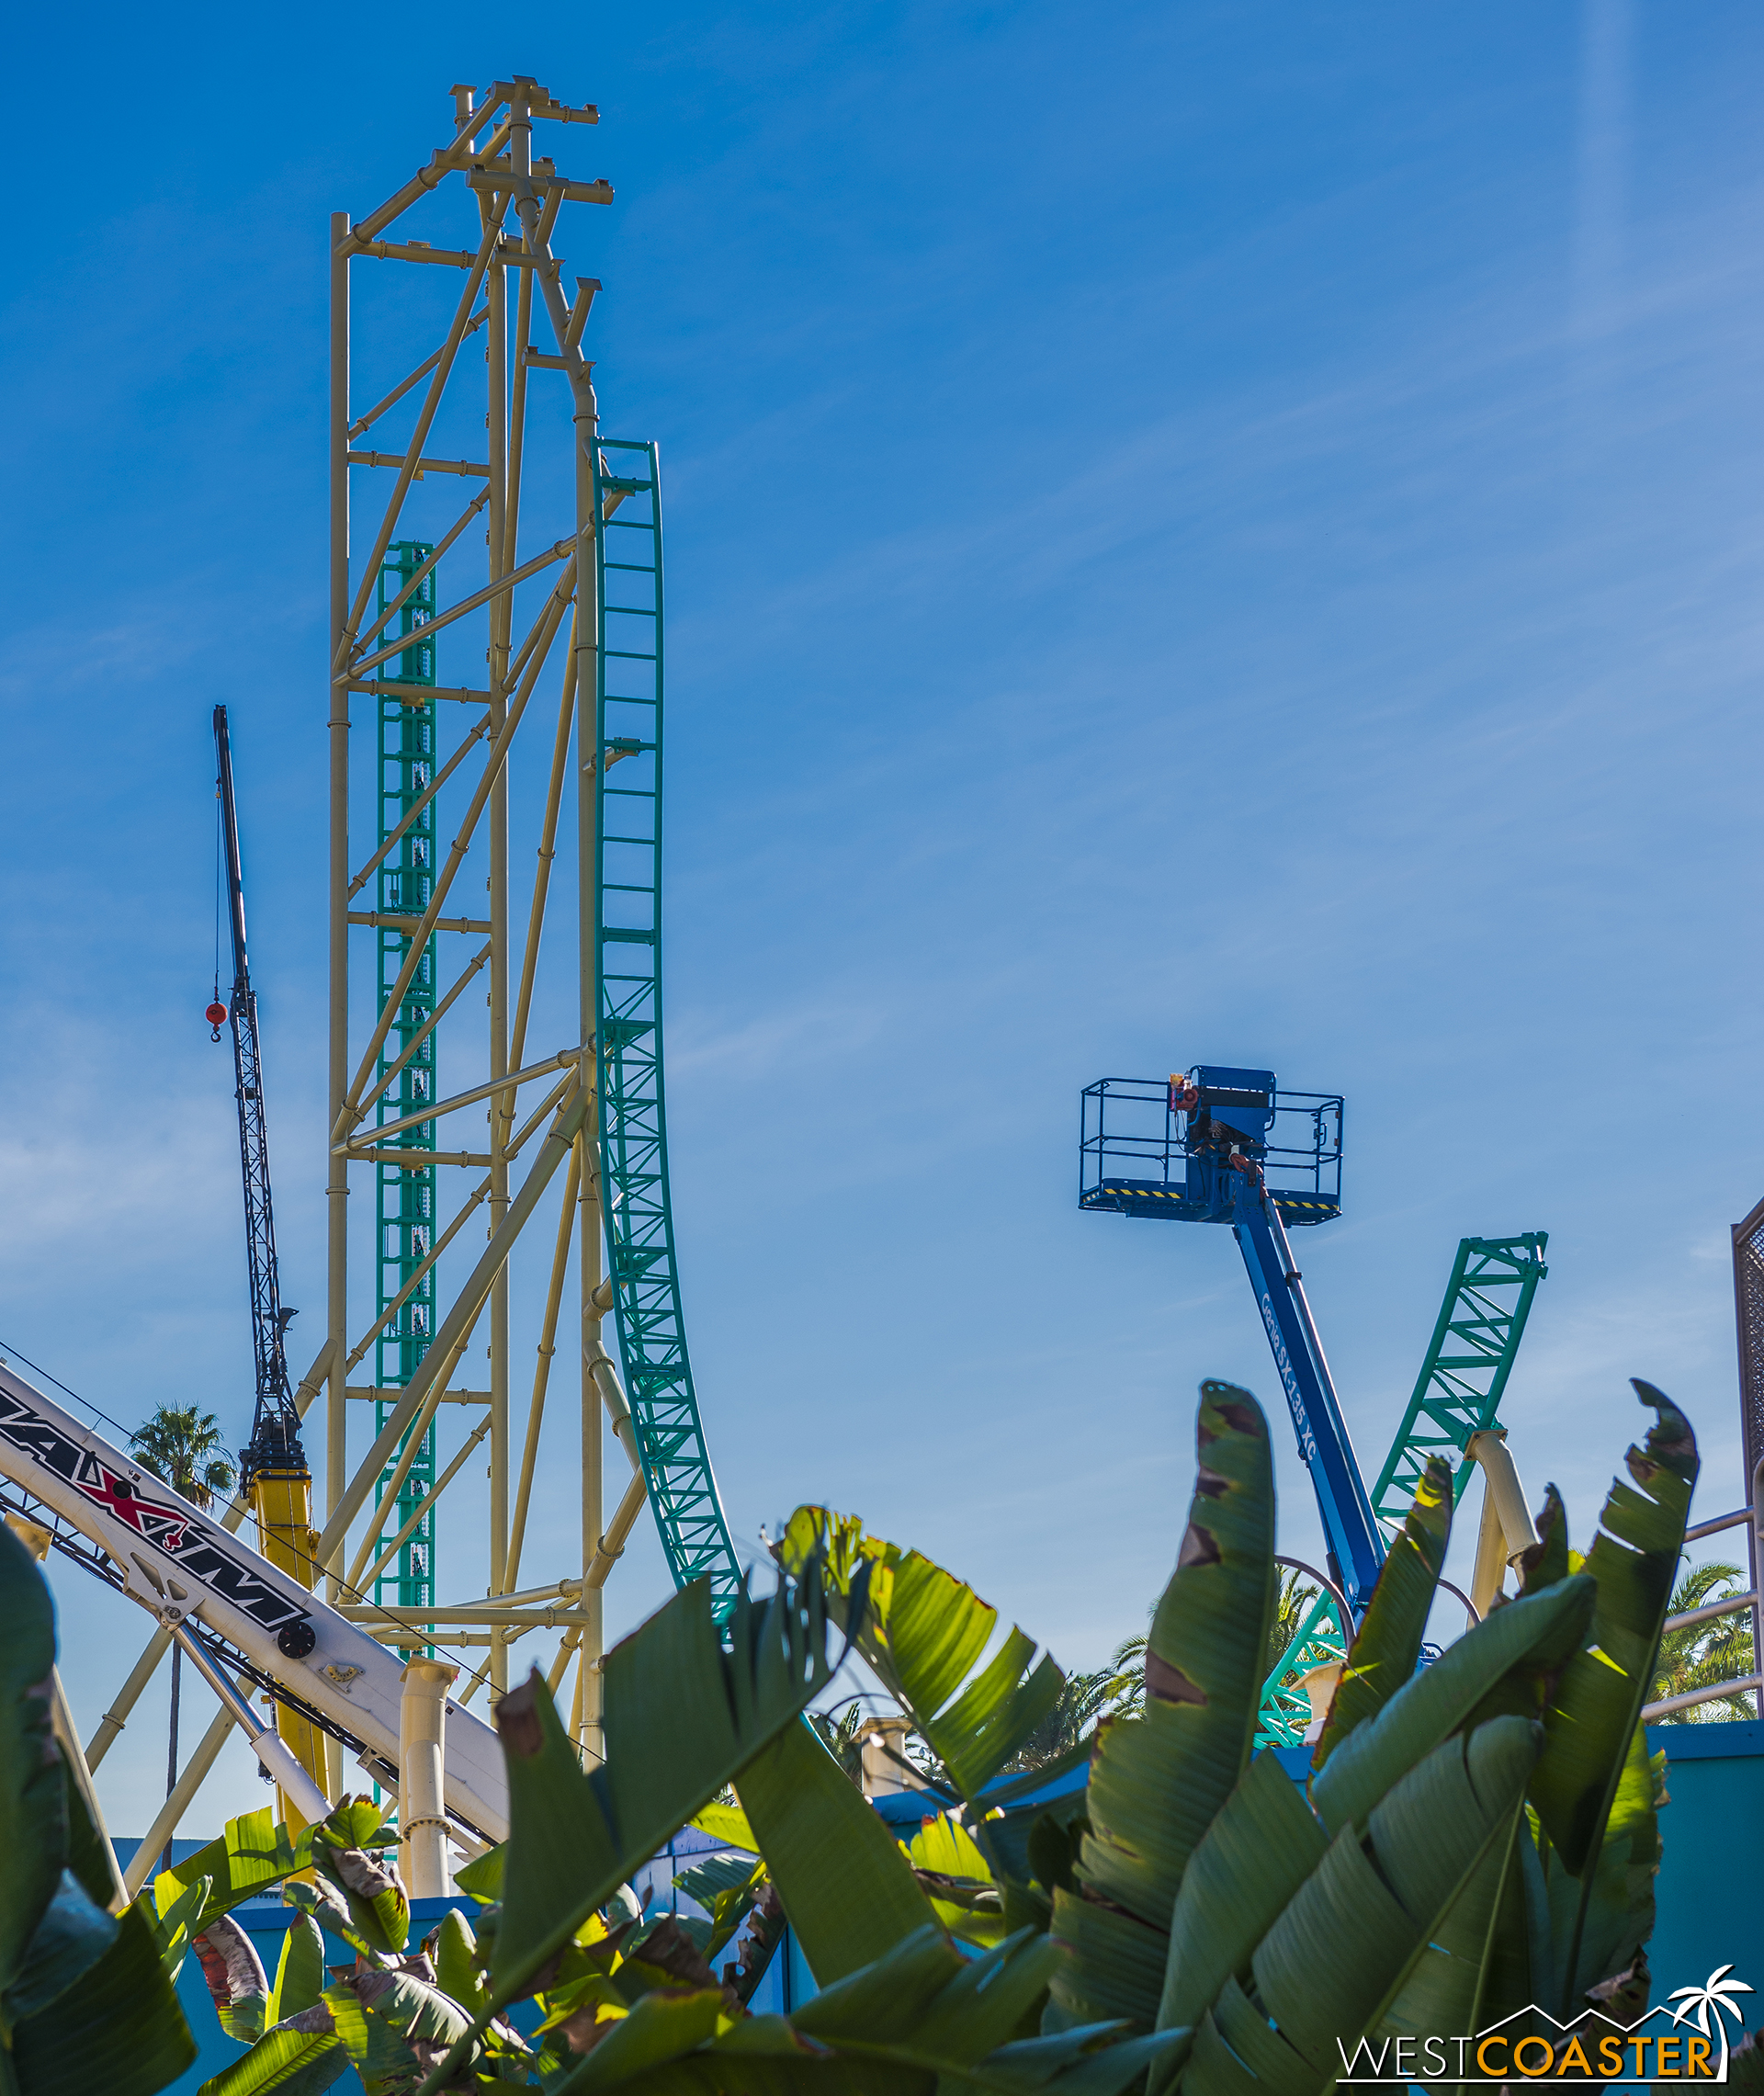  The ride will be visible from pretty much any angle in the park. 